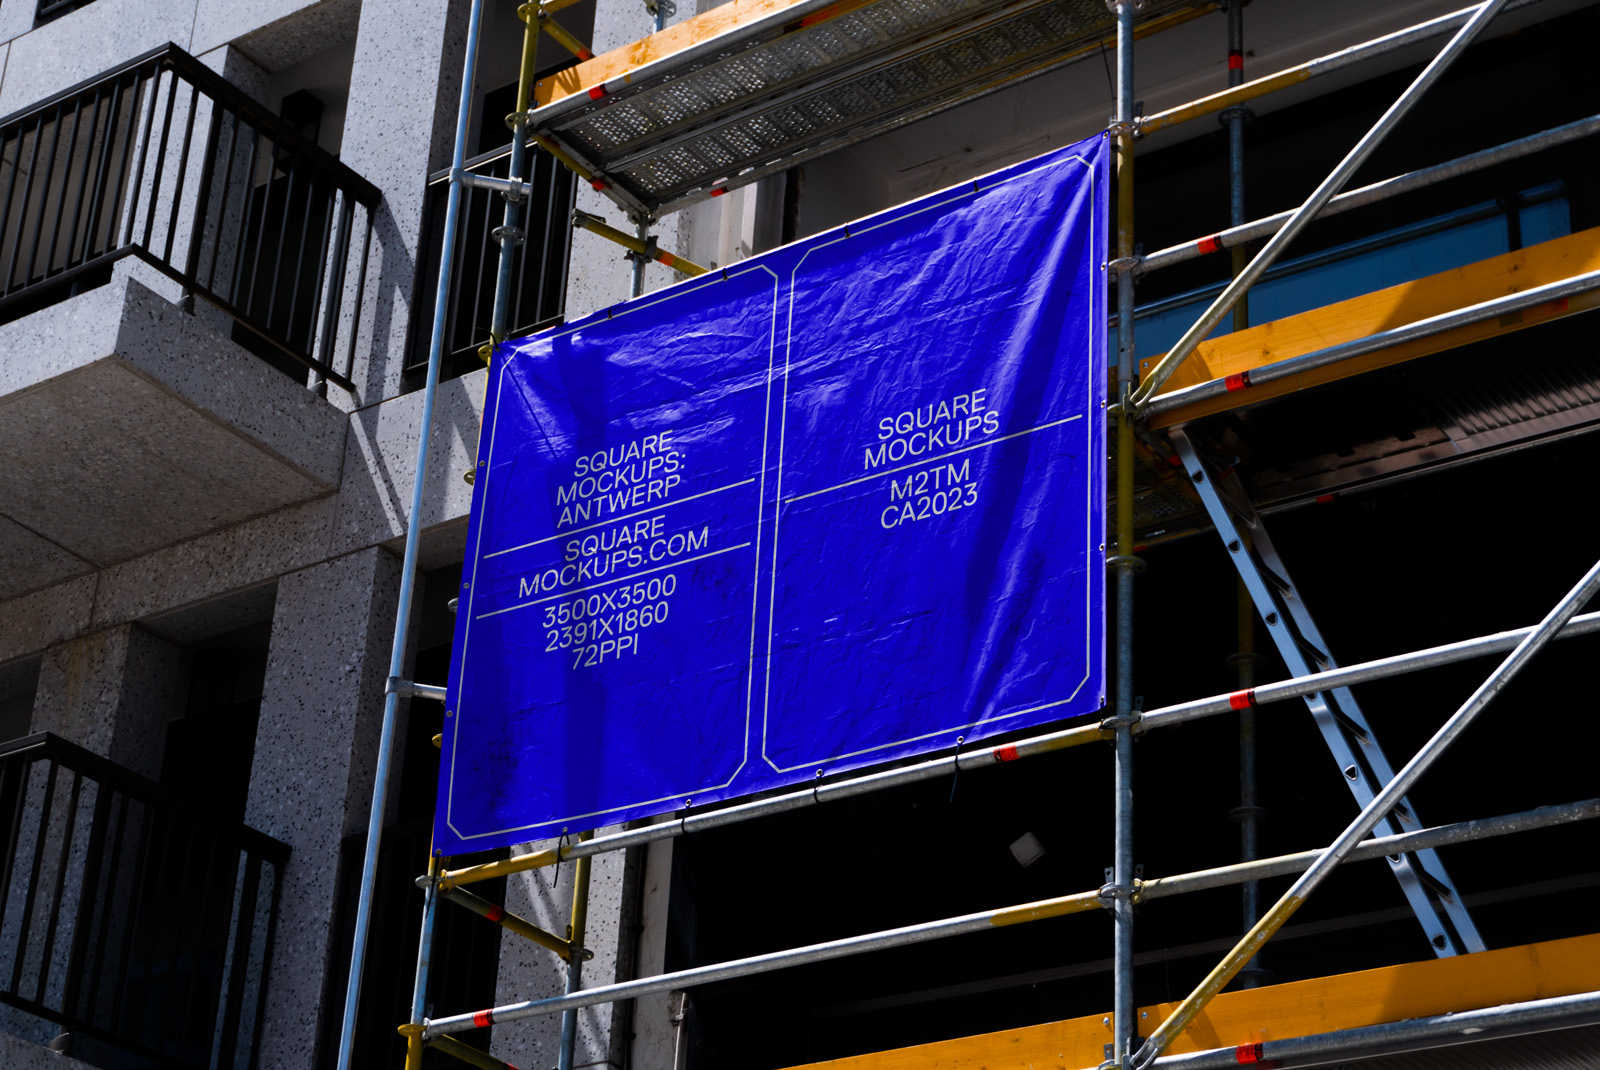 Blue square outdoor mockup banners hanging on a scaffold against a building exterior, designers' advertising space, high resolution.